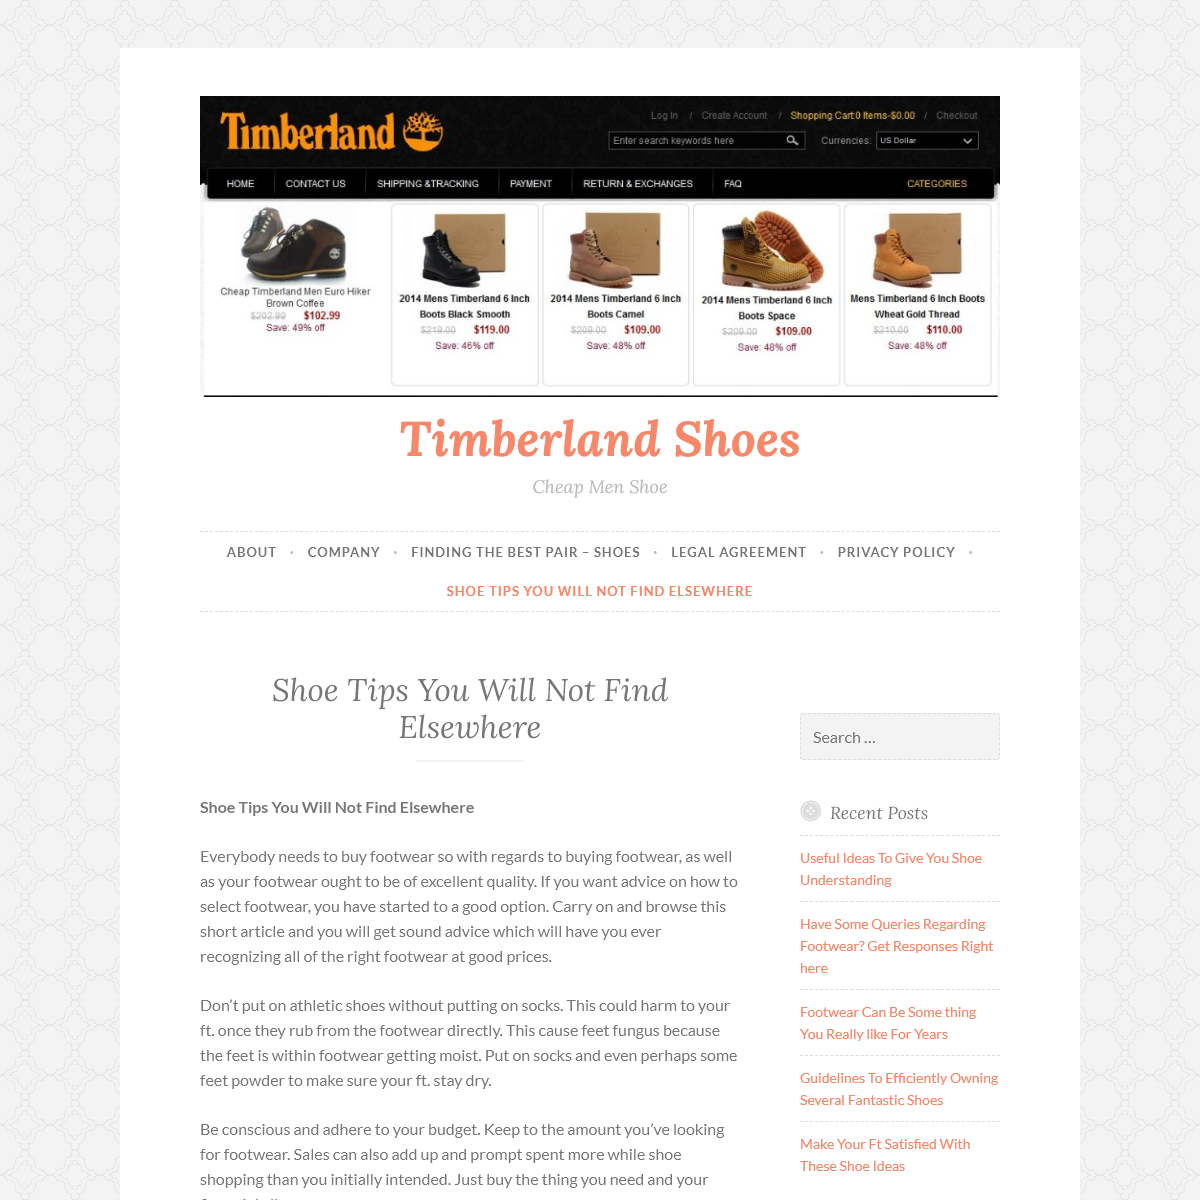 A complete backup of timberlandshoes.com.co